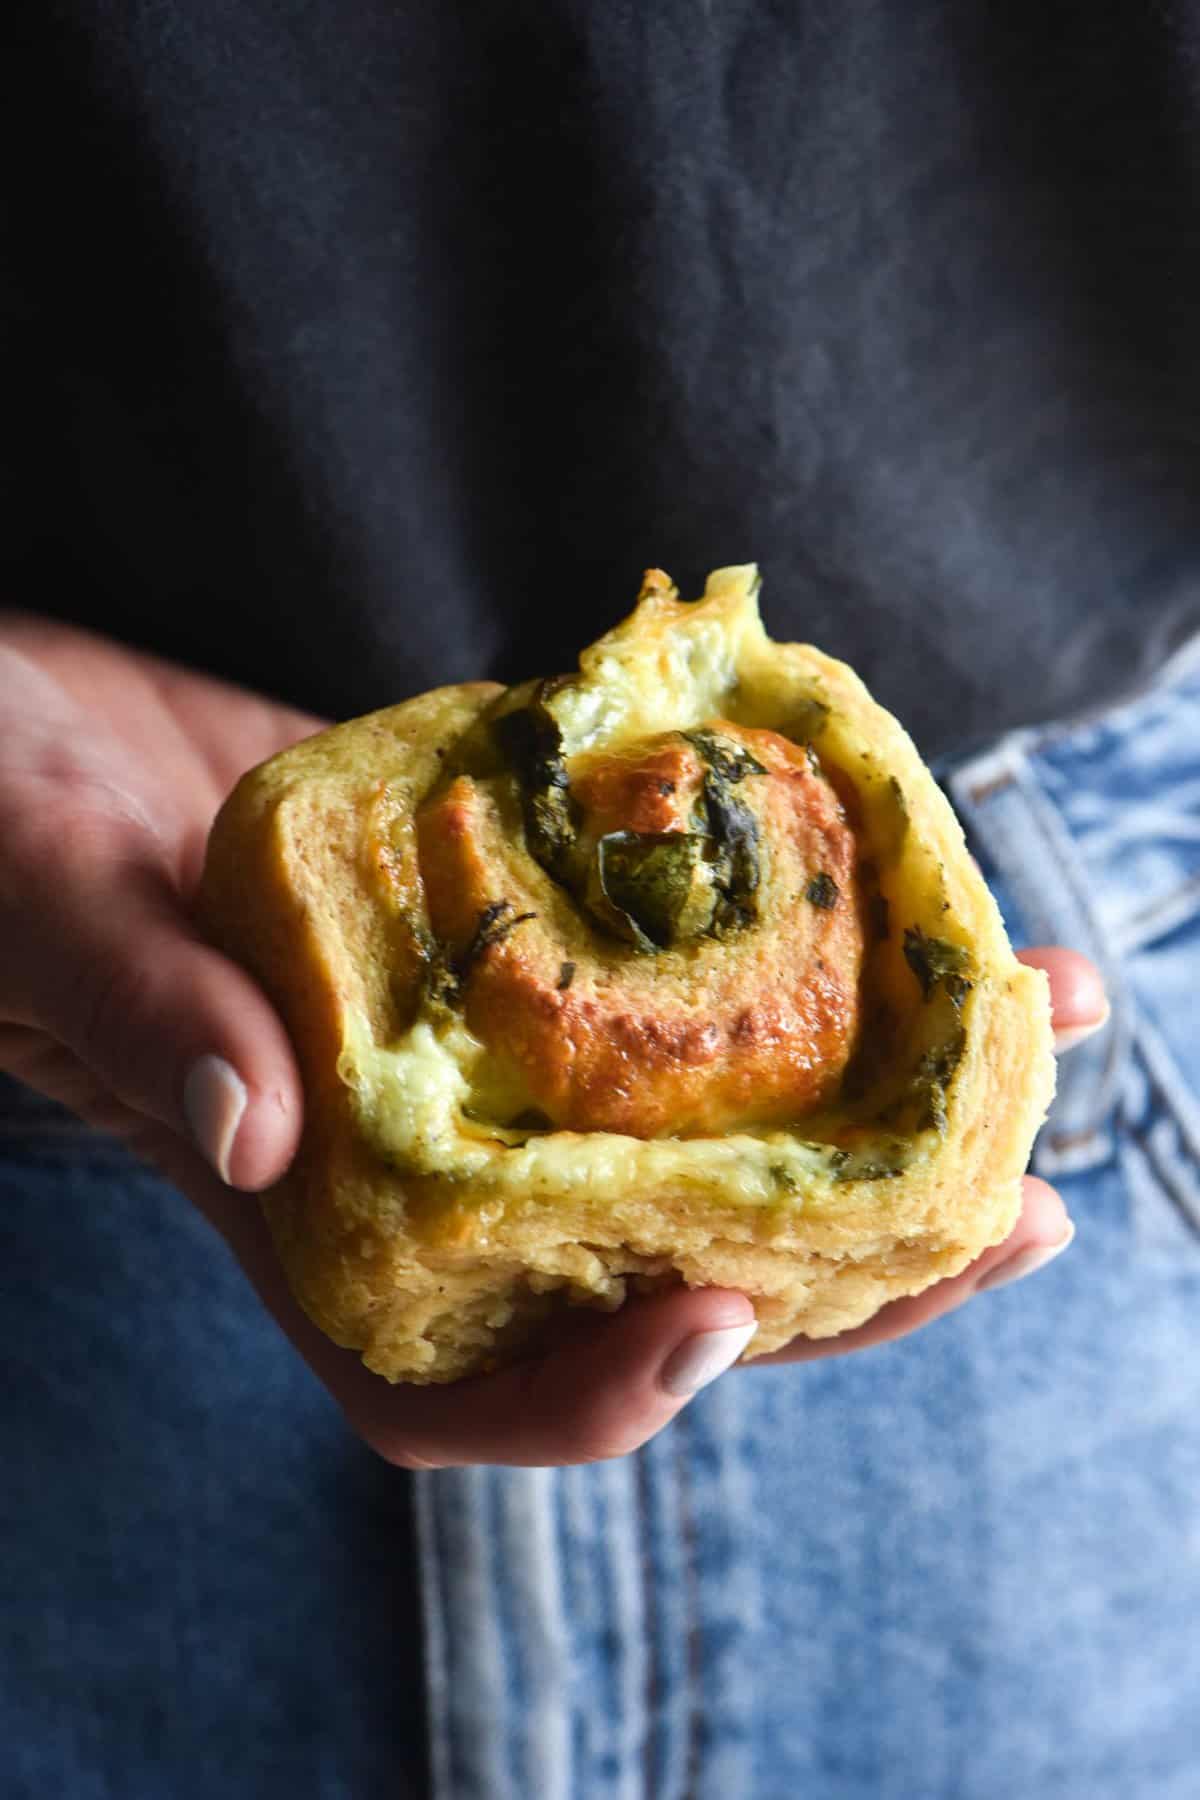 A hand holds out a gluten free pesto and cheese scroll. The person holding the scroll is wearing a denim skirt and a dark top which form the background of the close up image